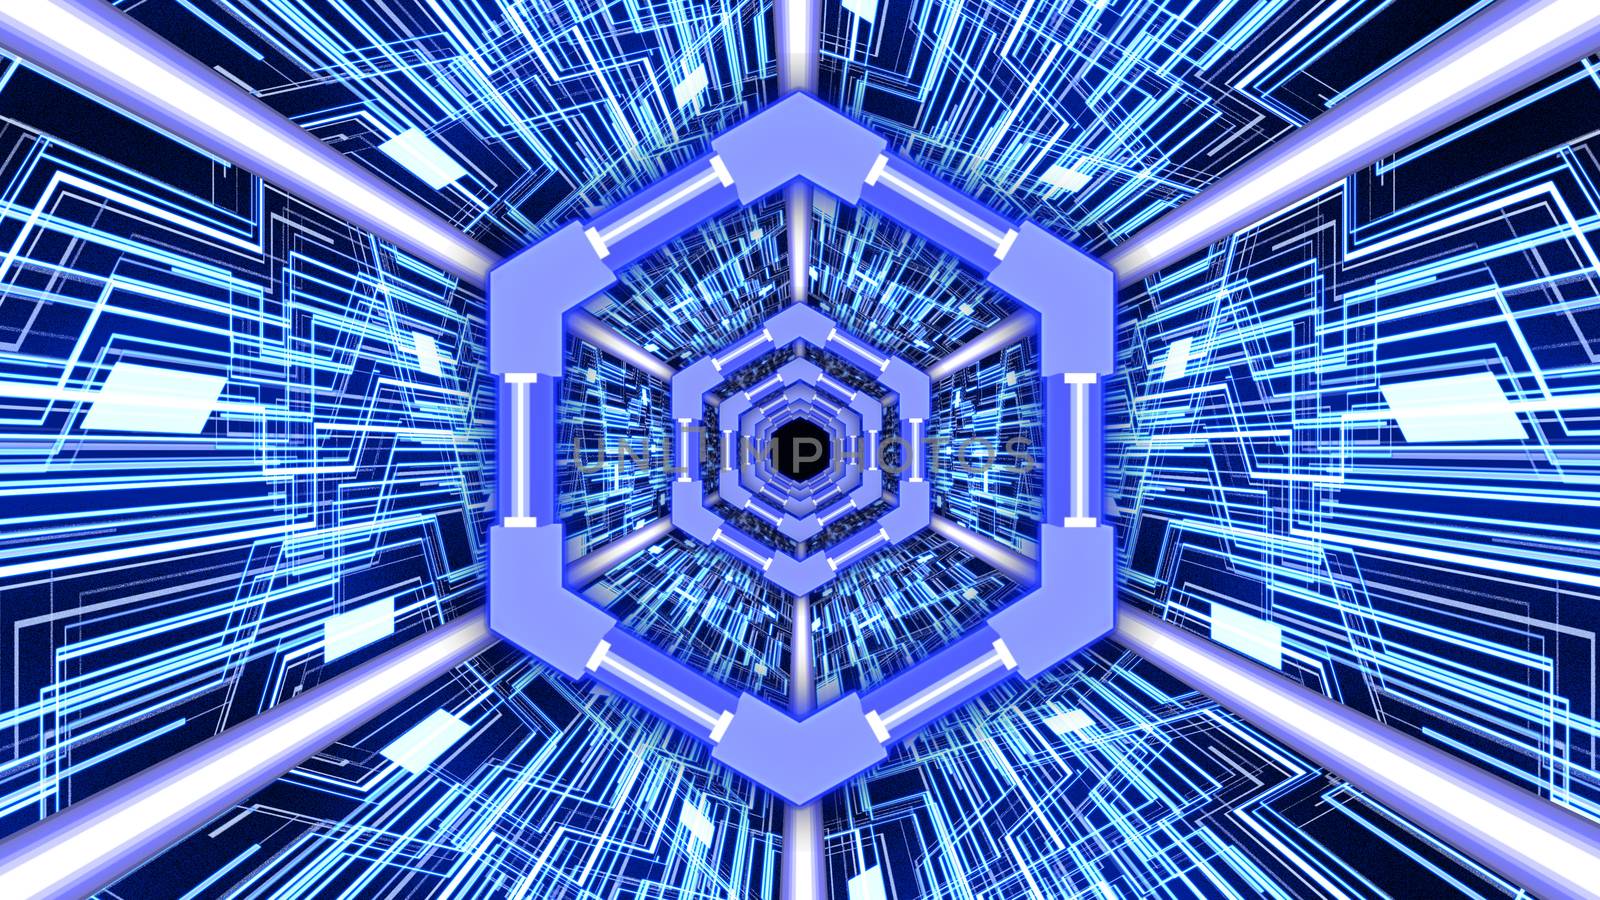 3D Abstract Digital Circuit System Tunnel with Hexagon Rings Borders in Blue Color Theme Background by ariya23156